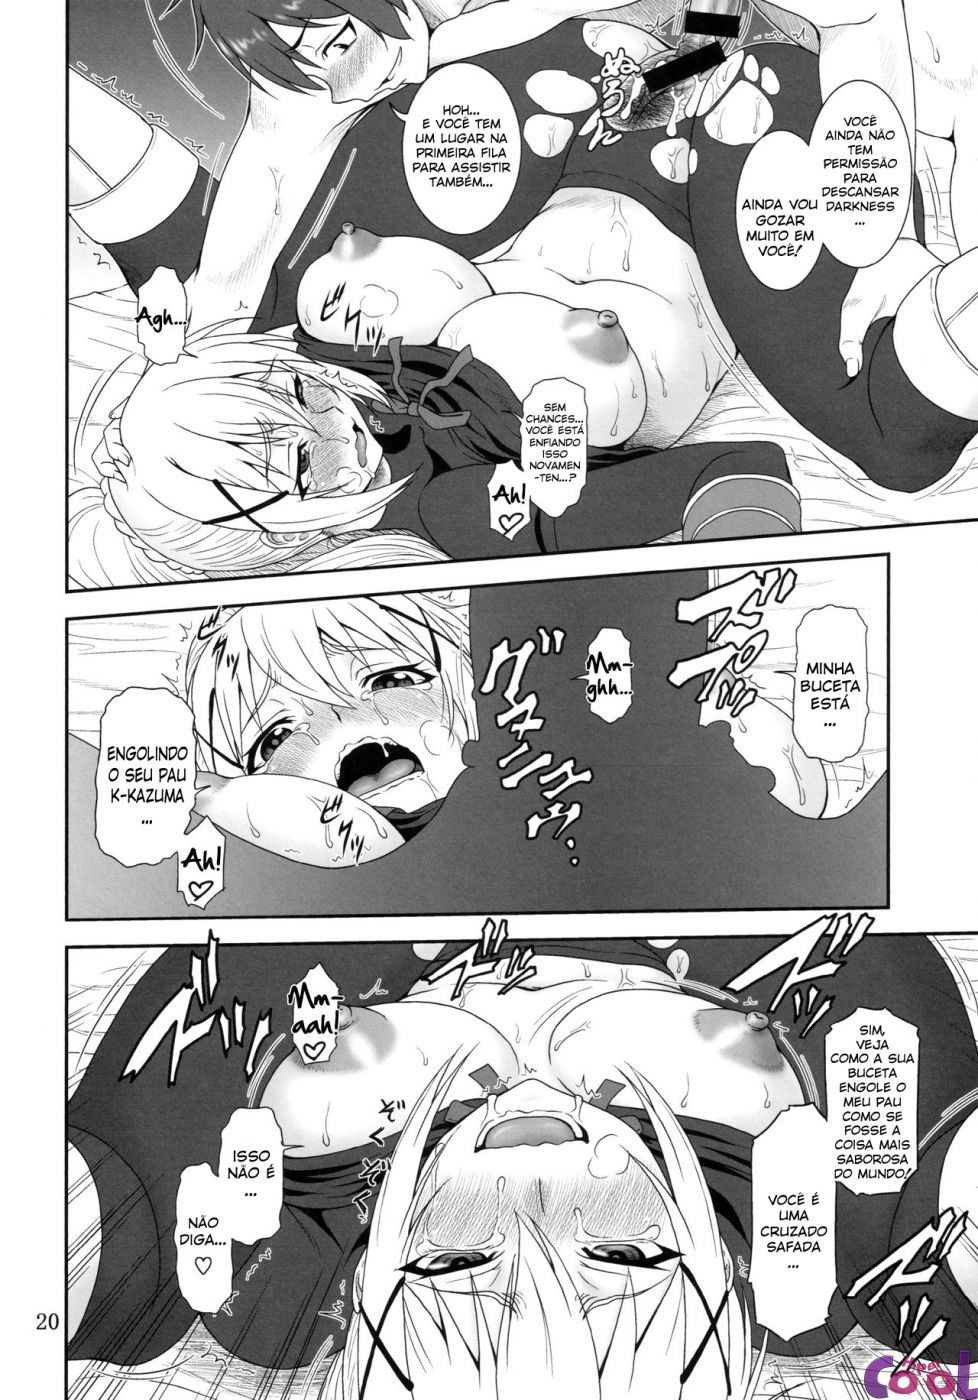 trouble-darkness-chapter-01-page-19.jpg